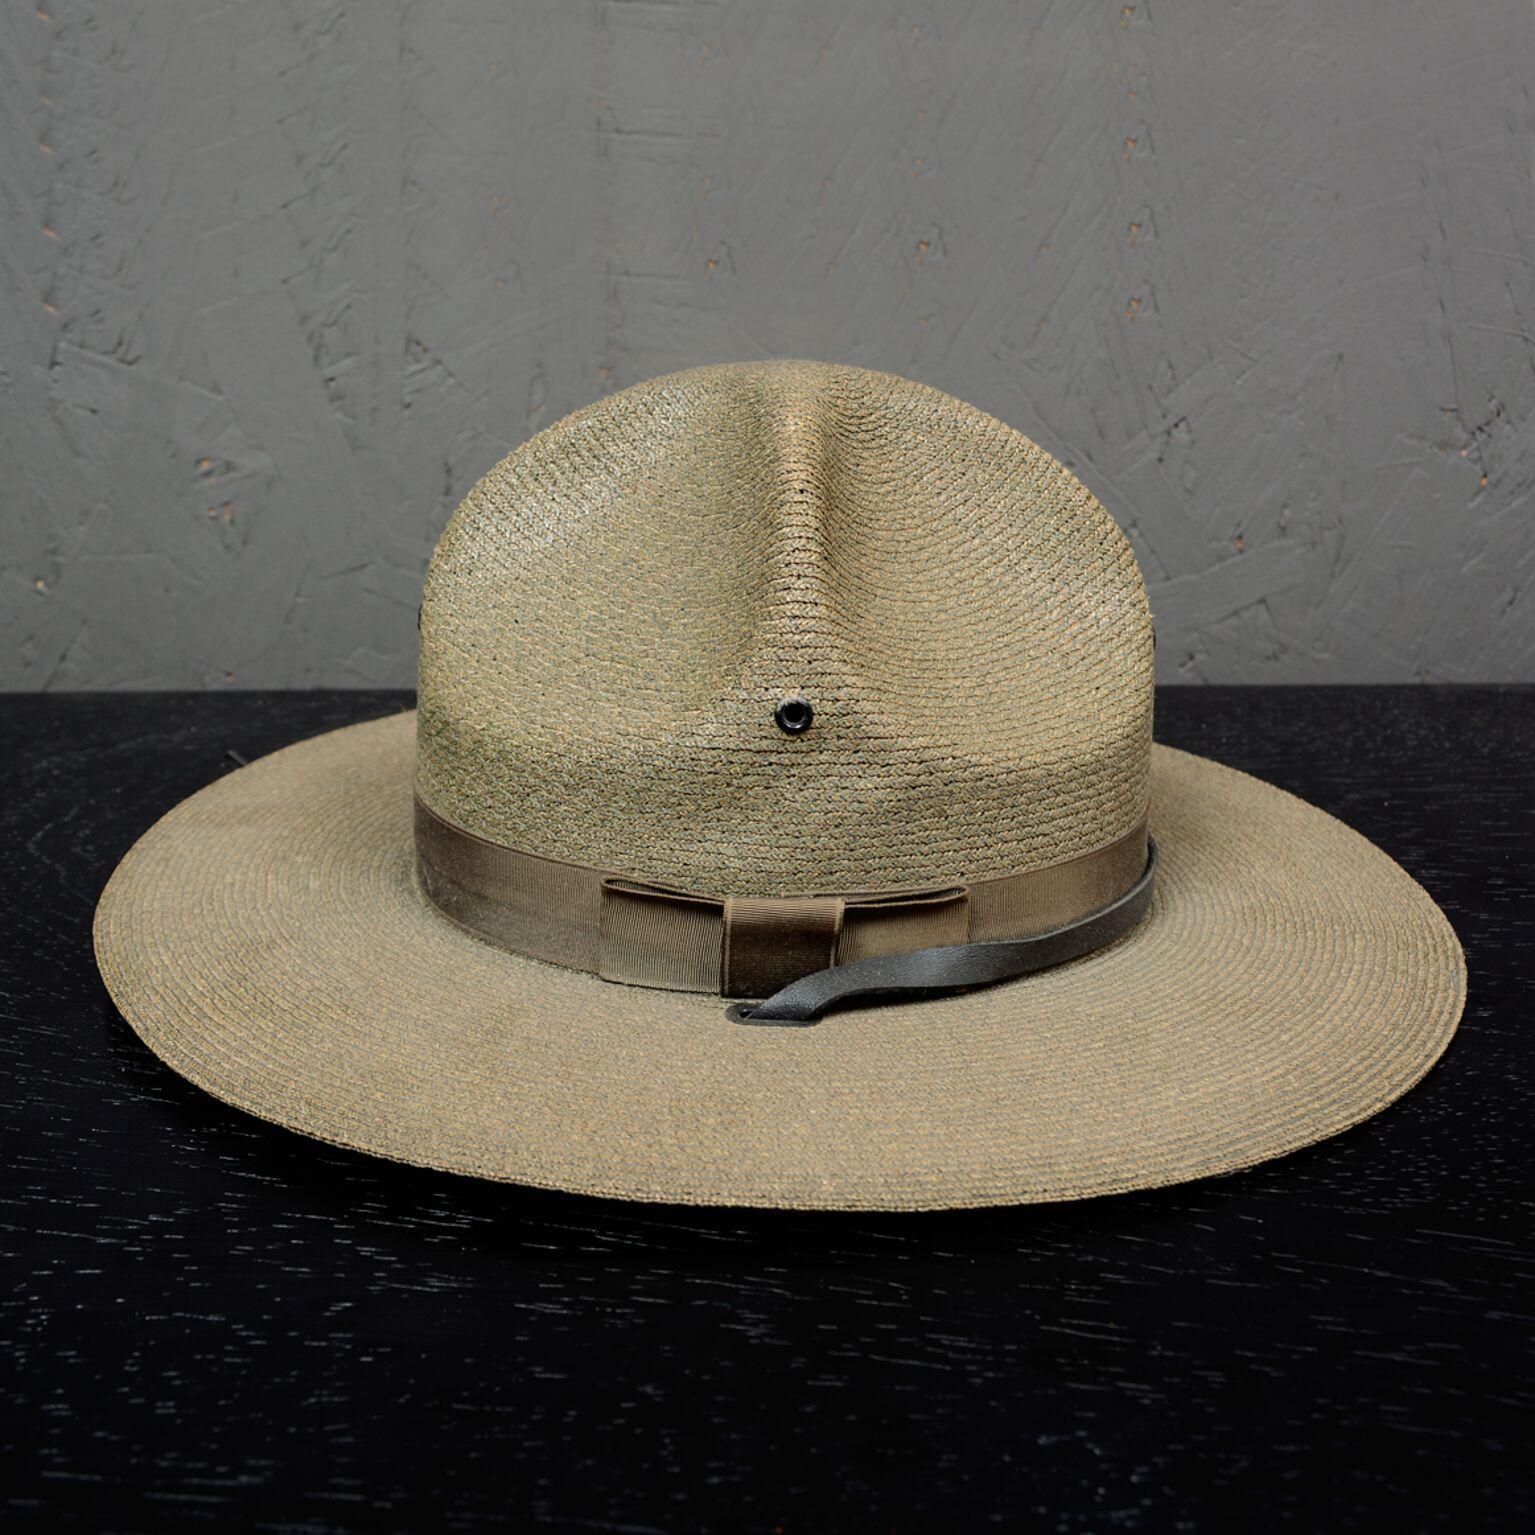 Hat
The Law Man genuine Milan hat. Sheriff Officer Ranger Police uniform hat.
Style is Campaign.
Labeled Size 7
Dimensions: 14 3/4